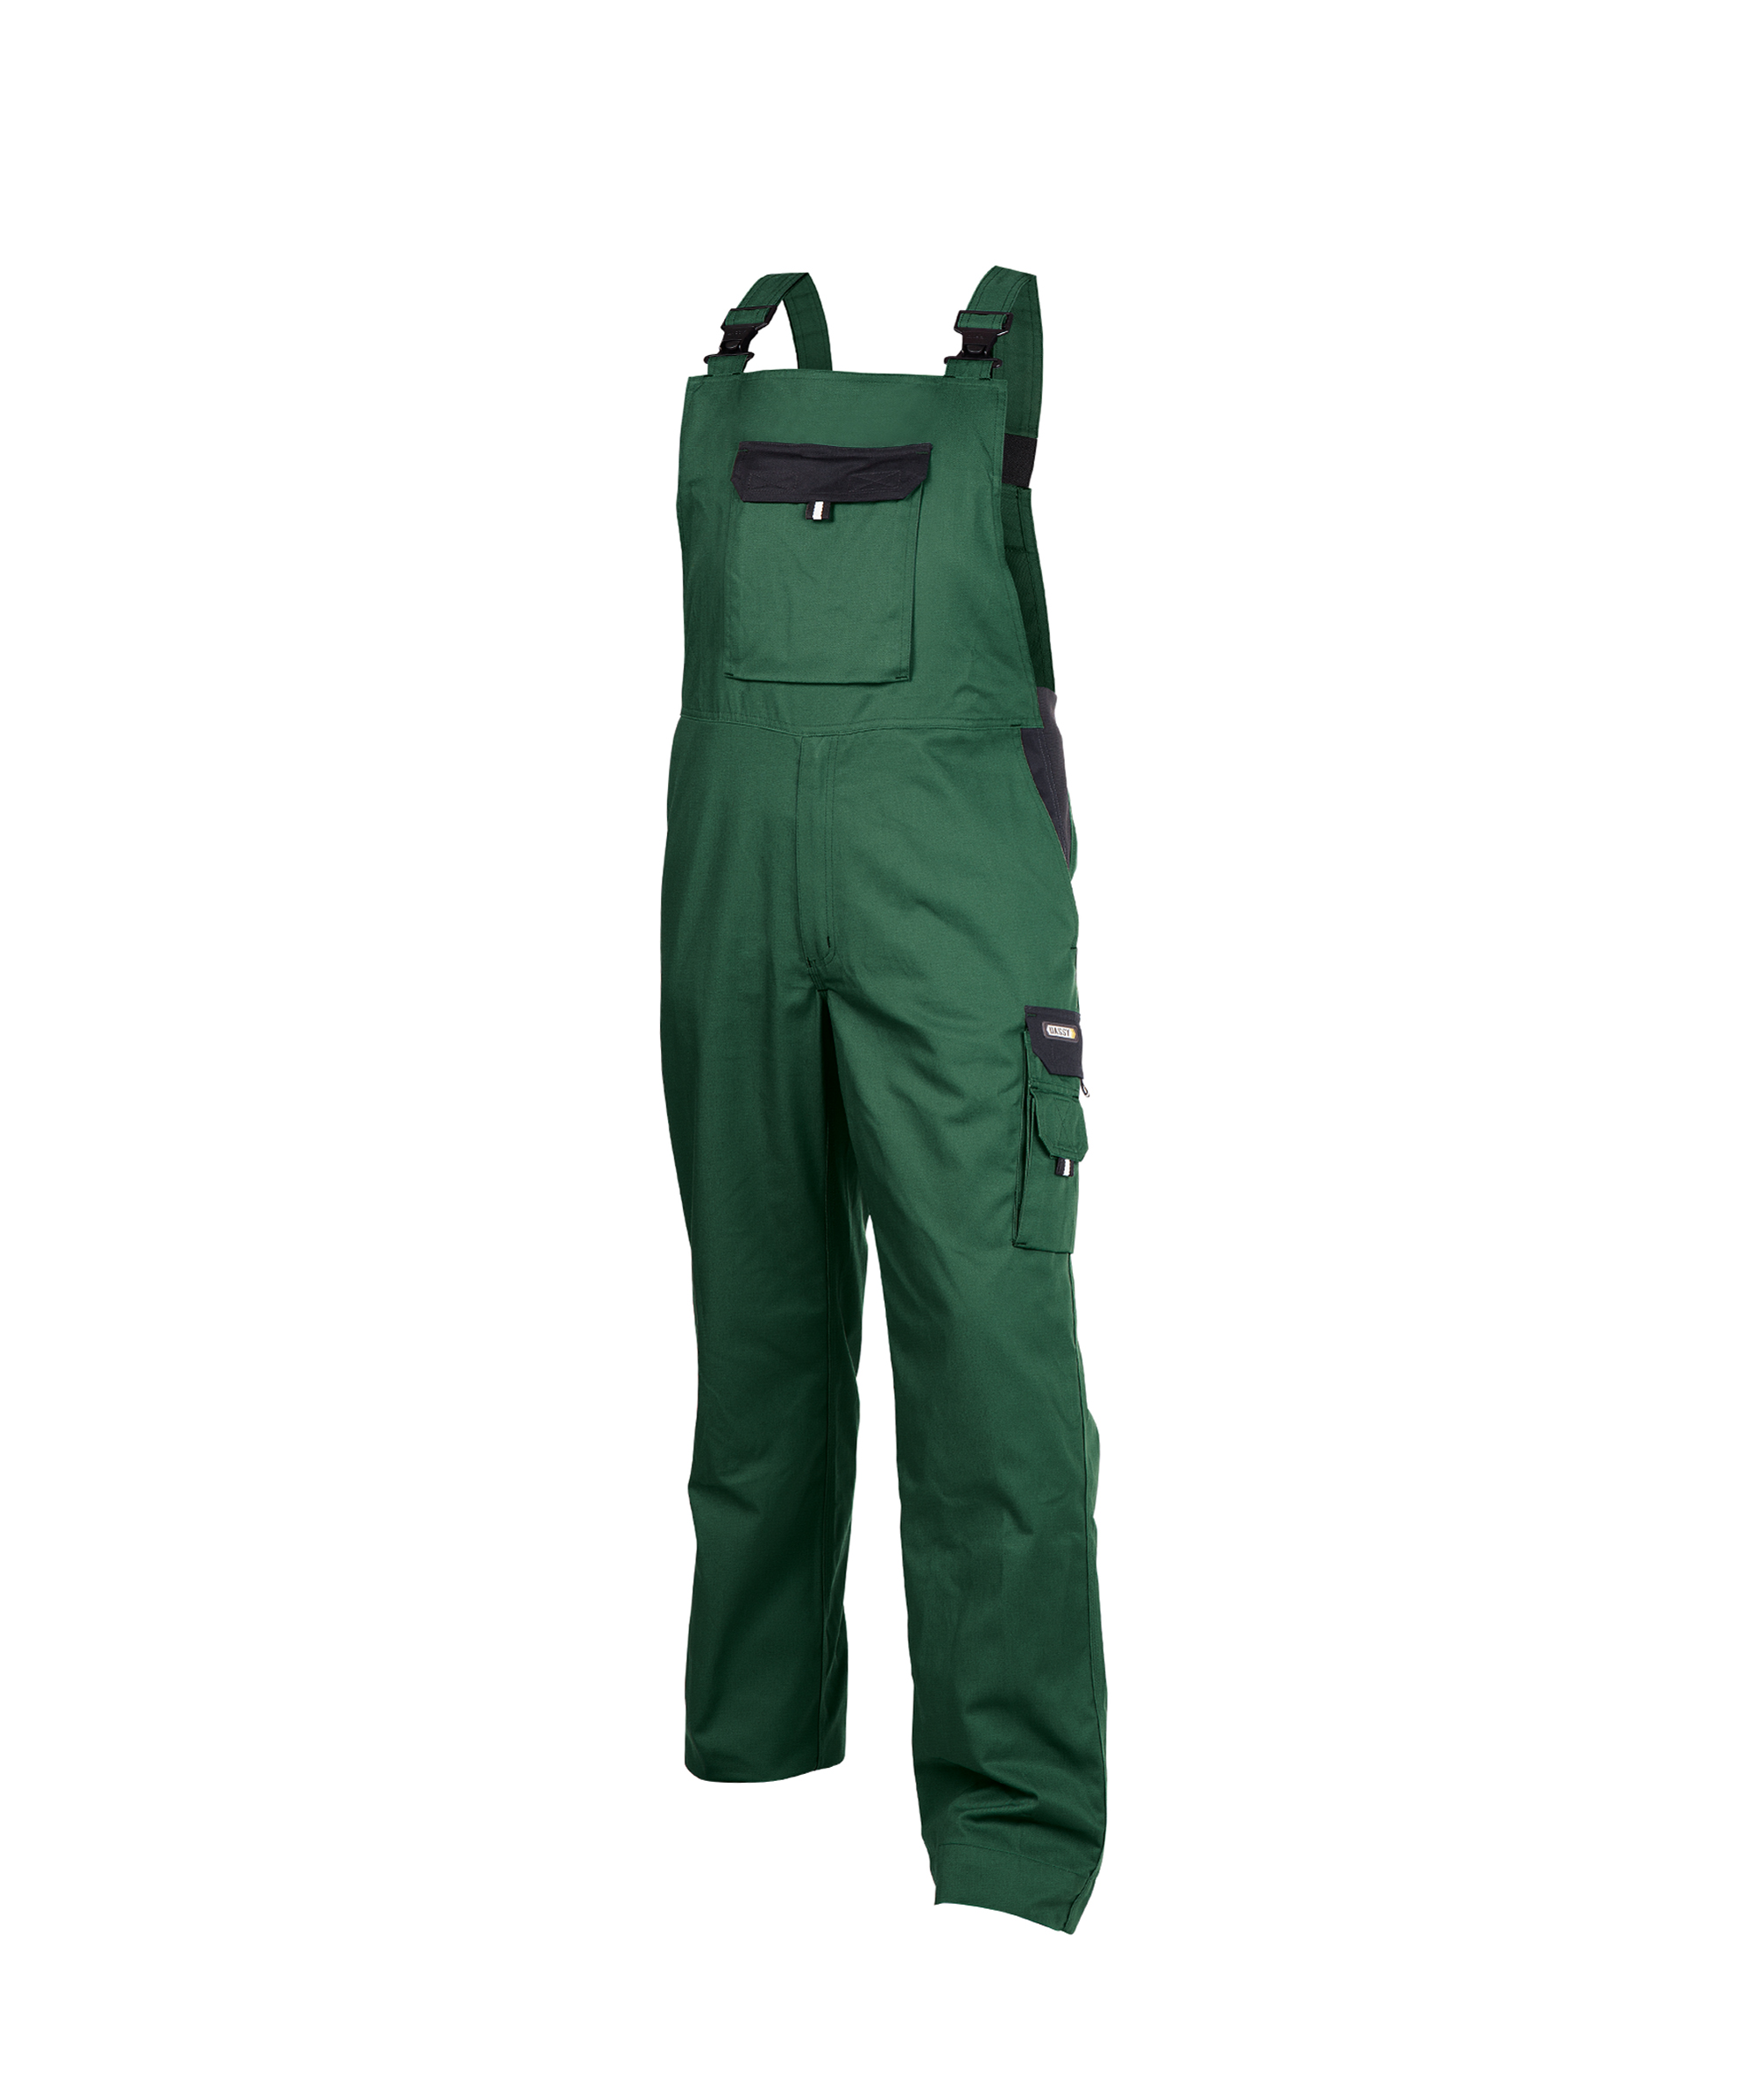 calais_two-tone-brace-overall_bottle-green-black_front.jpg